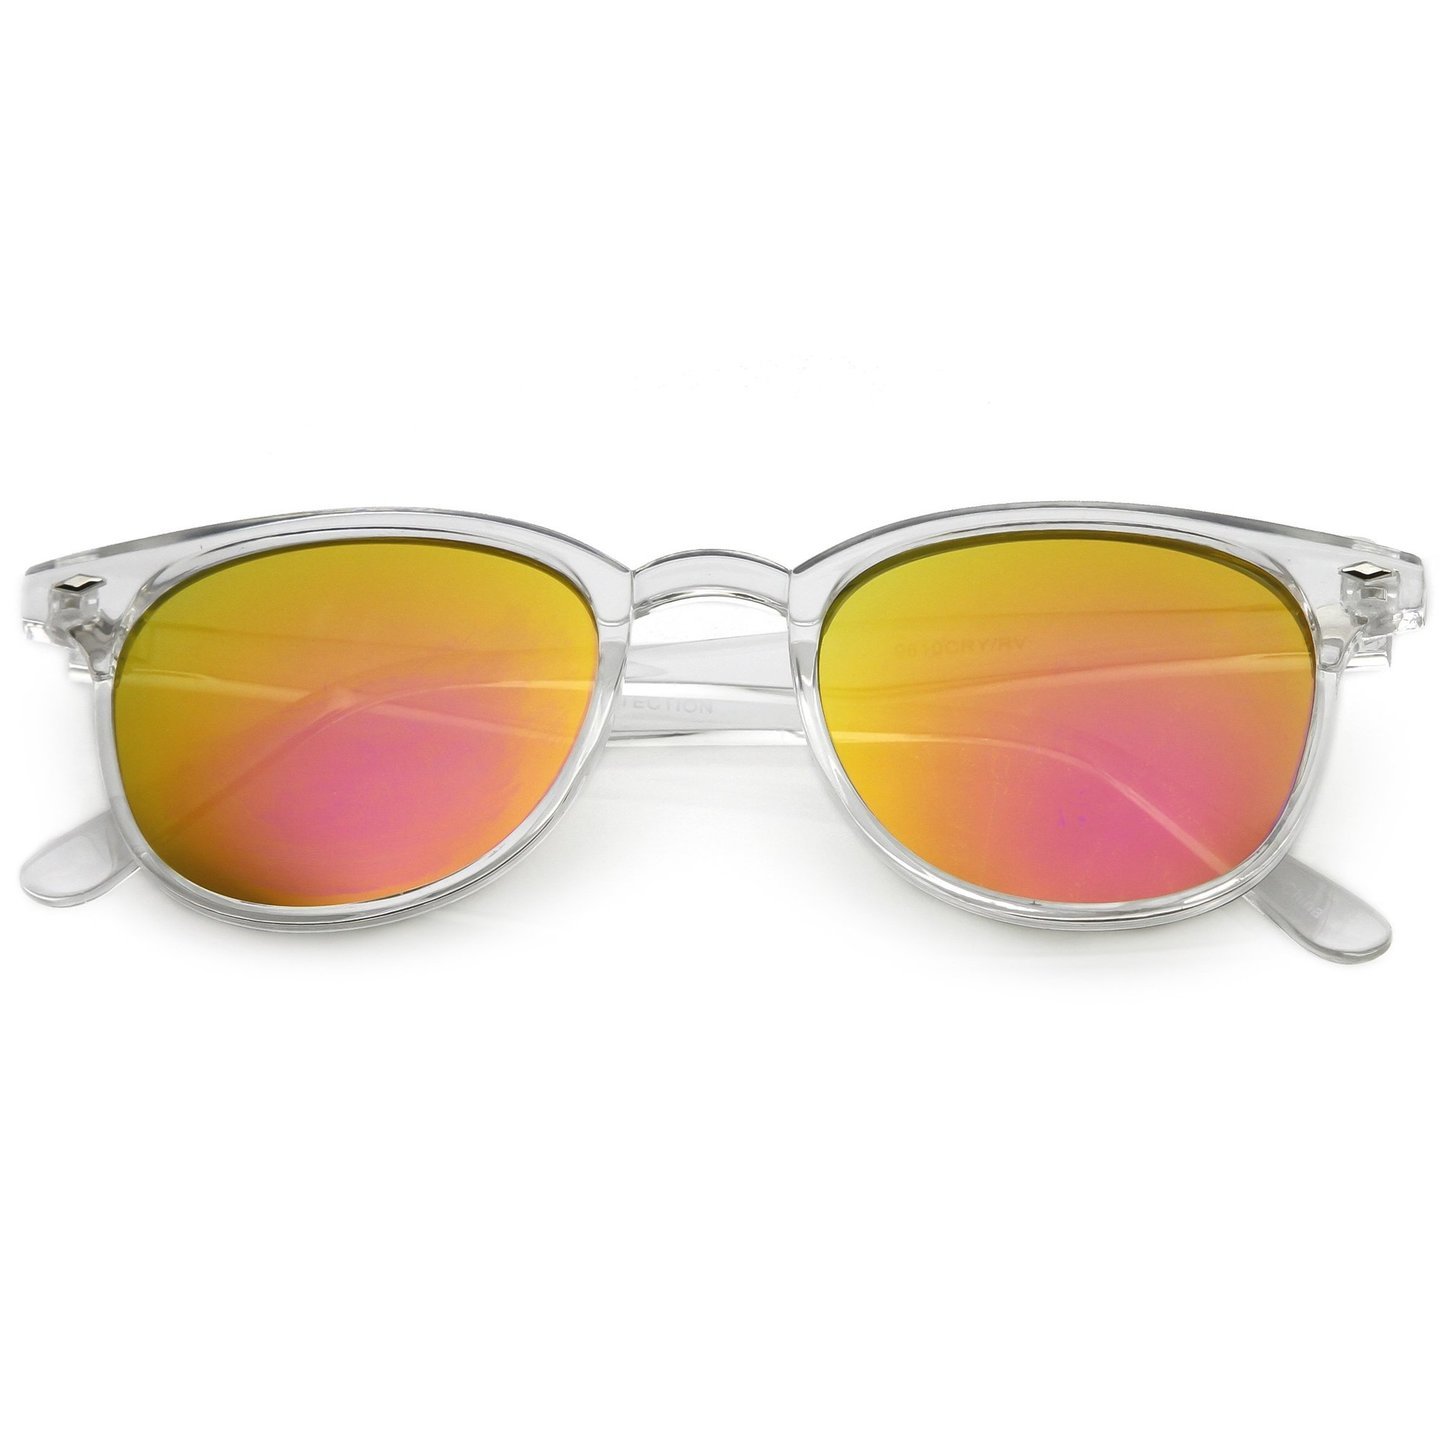 Mirrored Lens Clear Square Frame Sunglasses